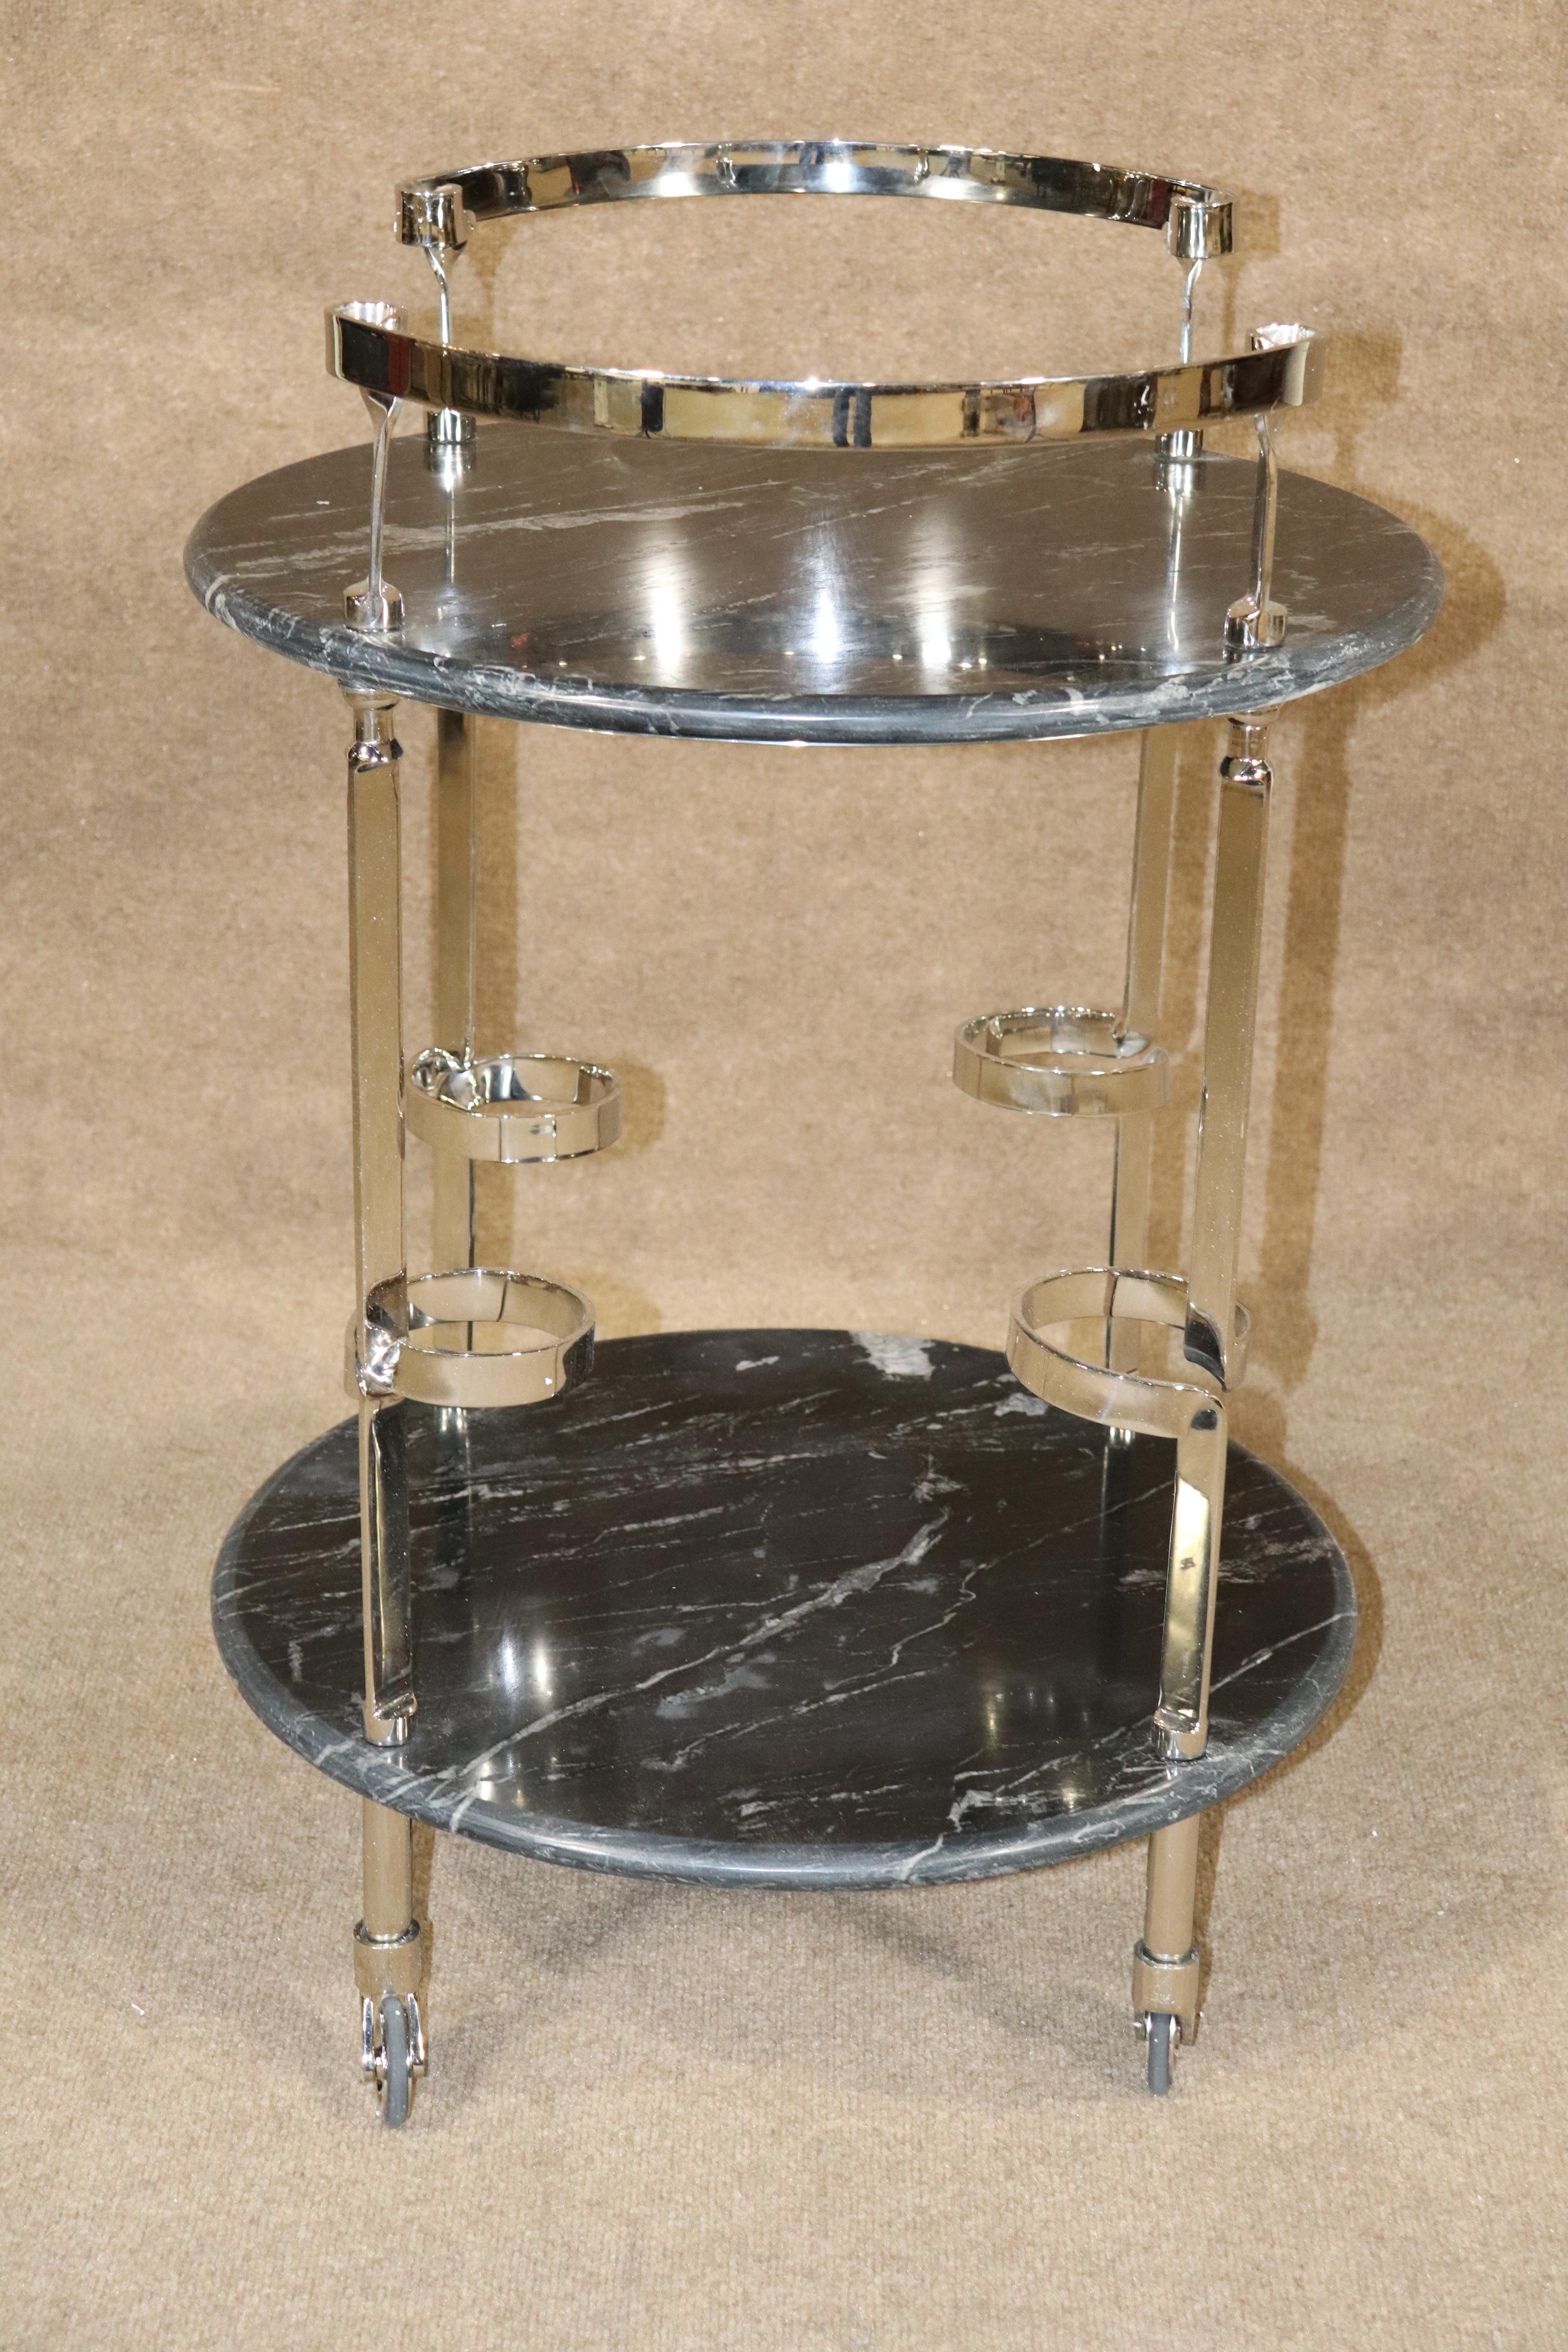 Rolling bar cart made of thick marble and polished chrome. Four rings for bottles and tray area for glasses and accessories. 
Please confirm location NY or NJ.